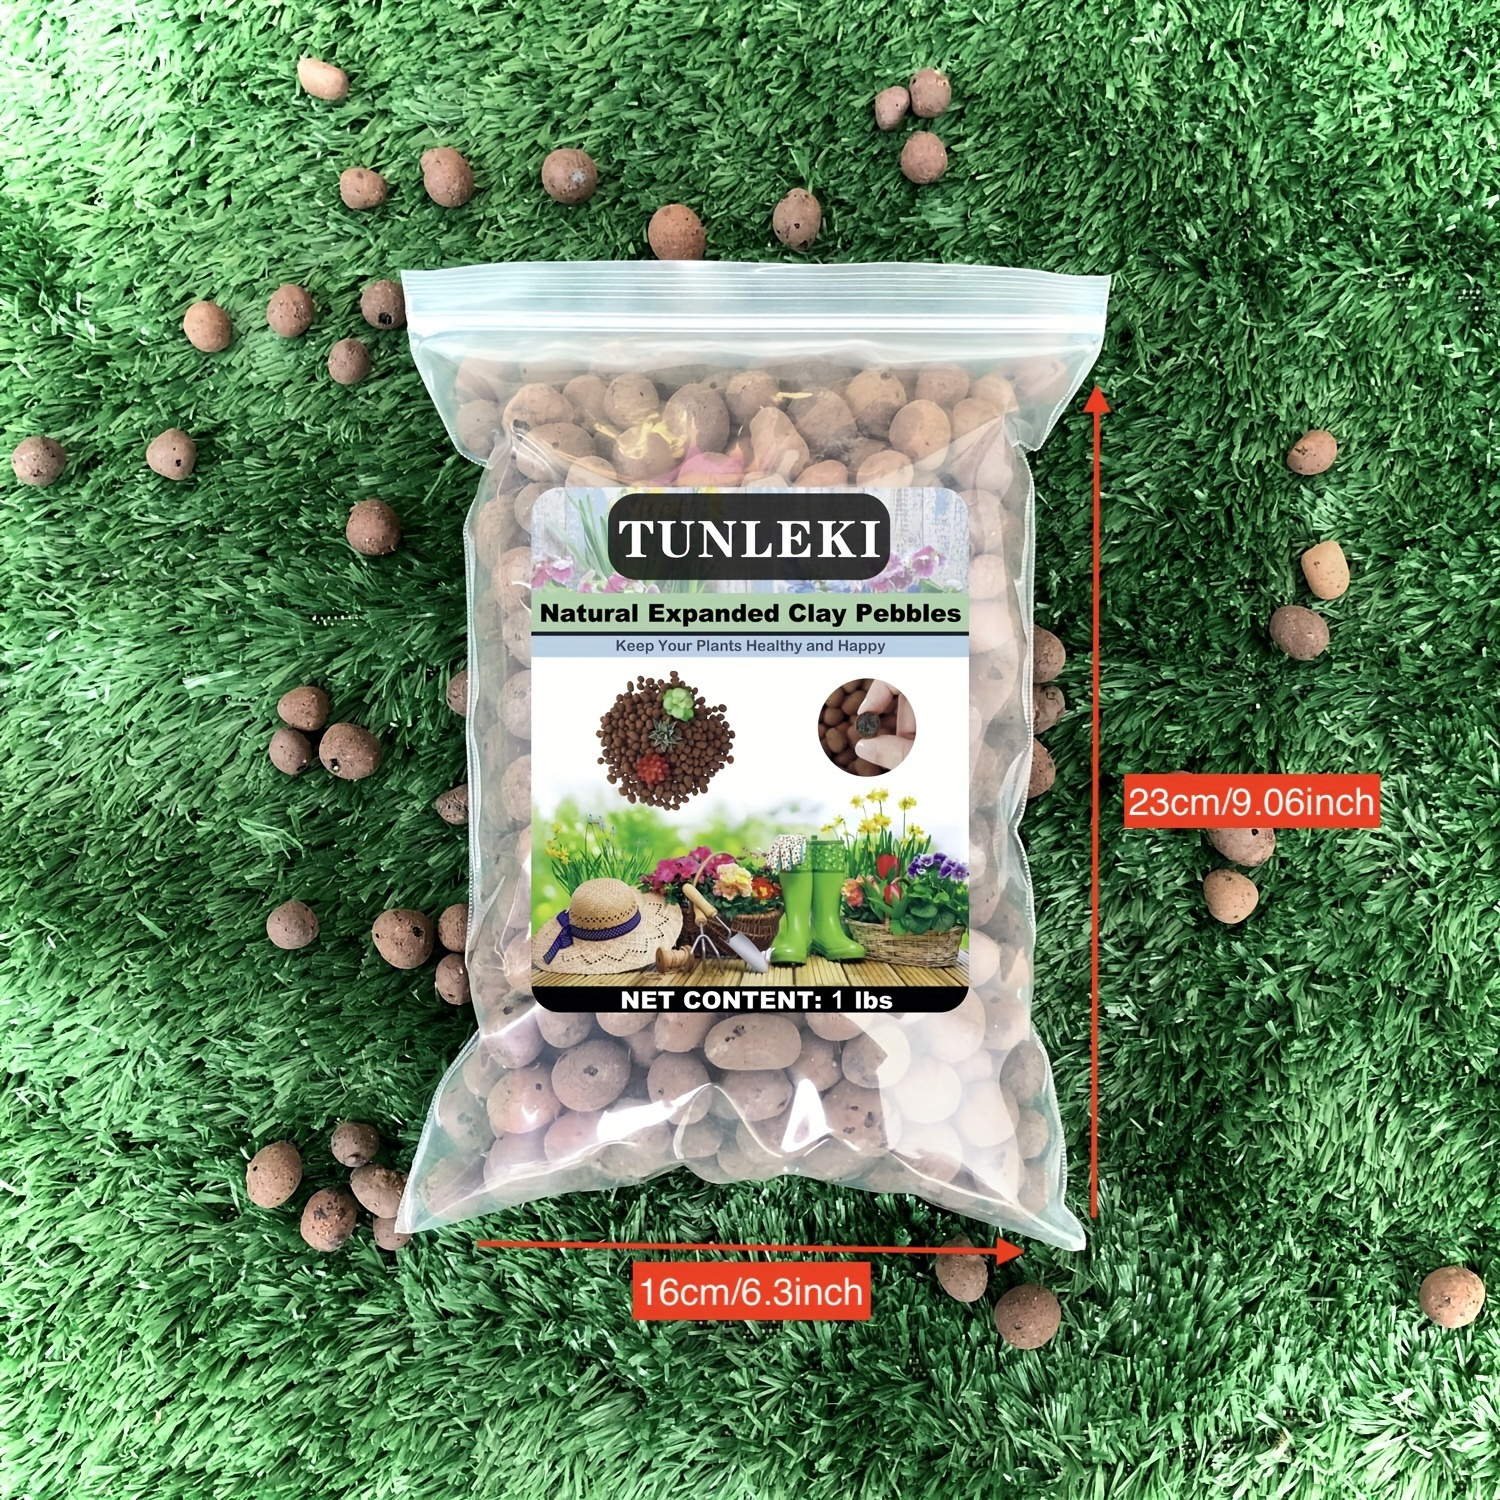 

1 Pack 1/2/4 Lbs Leca Expanded Clay Pebbles, 8-16mm Expanded Clay Aggregate, Natural Clay Pebbles For Hydroponic & Decoration Growing, Orchid Potting Mix, Leca Balls For Indoor Garden Plants